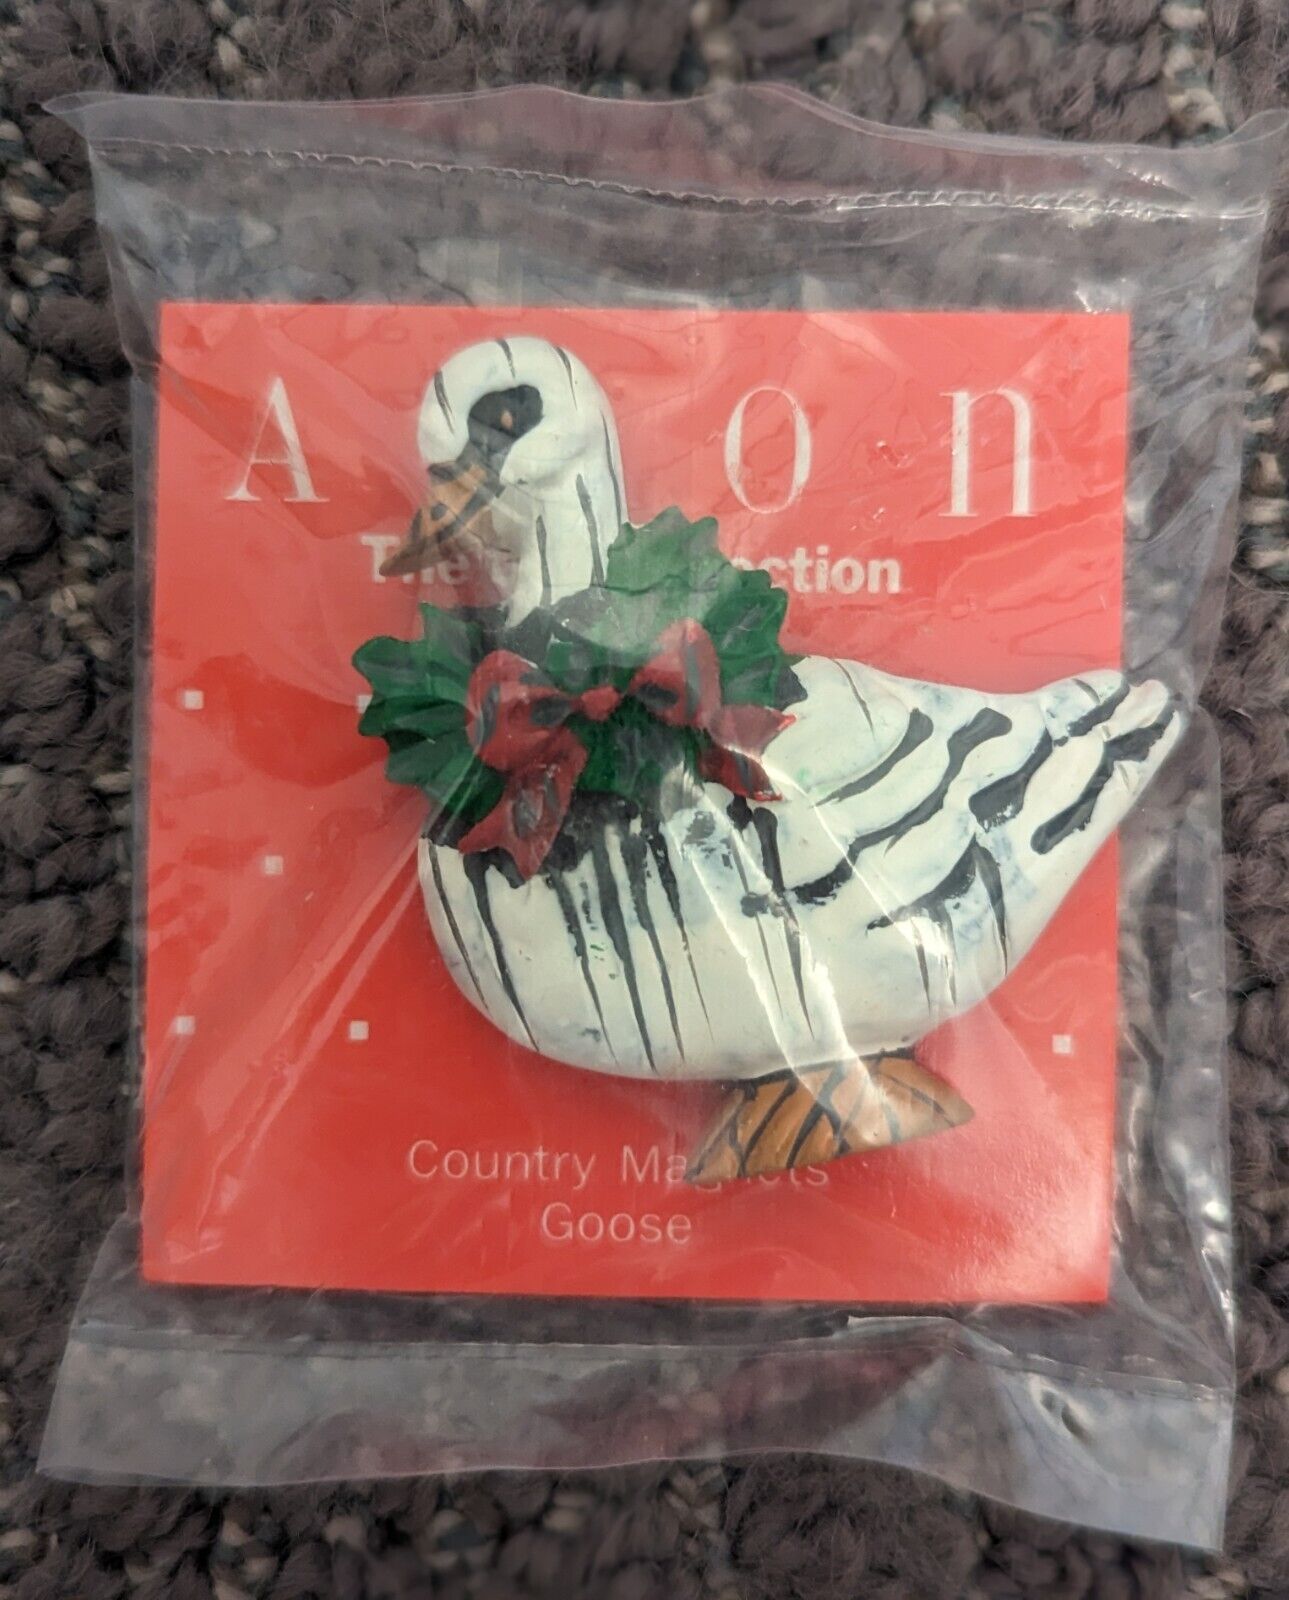 NEW Avon Gift Collection Country Magnet- Goose VINTAGE 1989